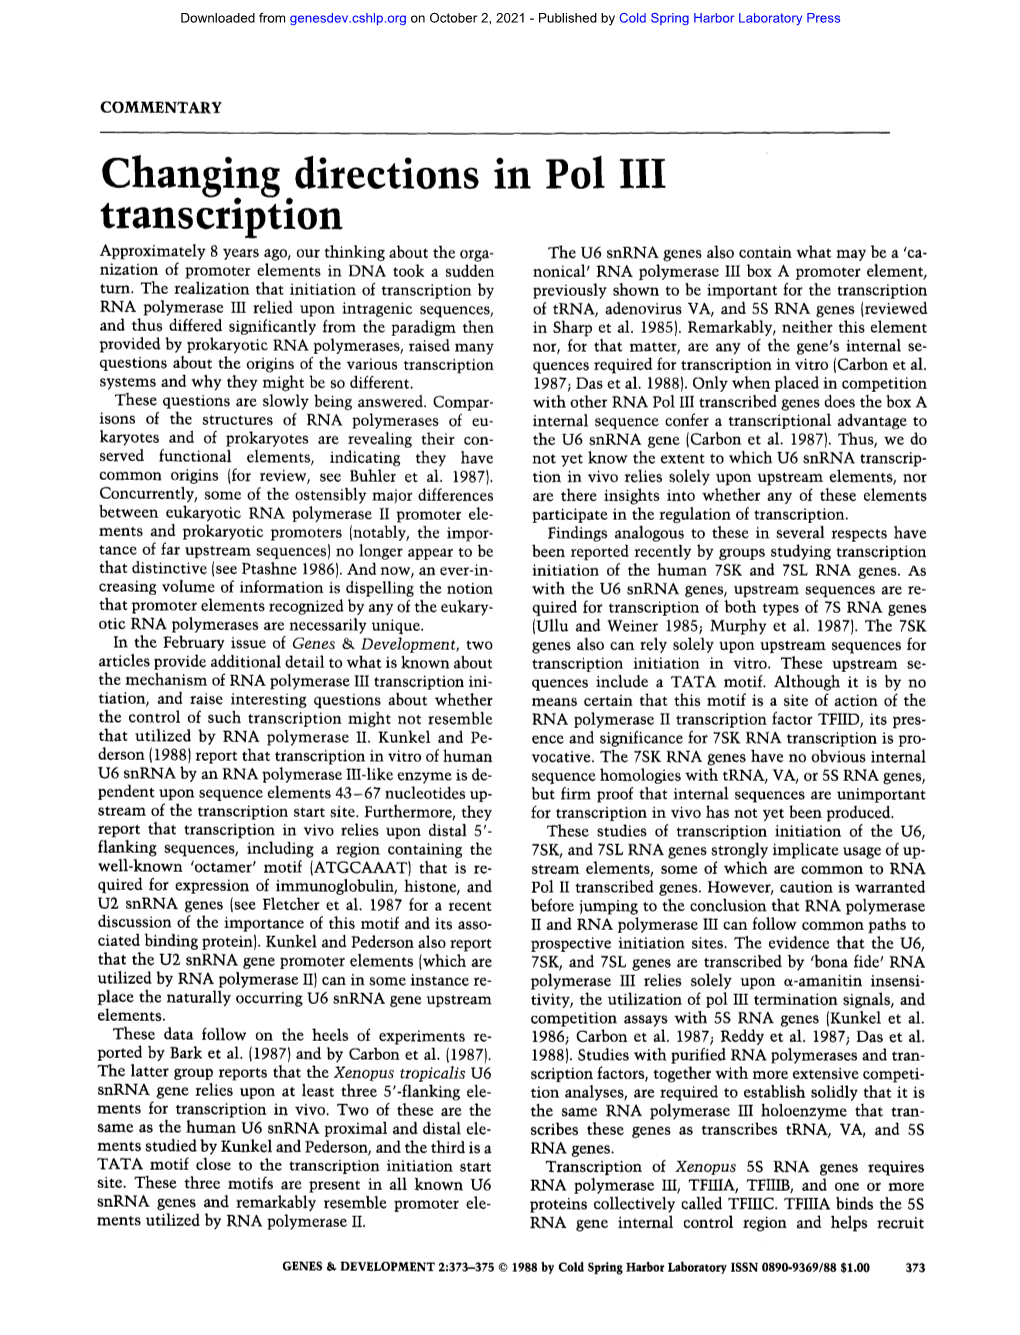 Changing Directions in Pol III Transcription